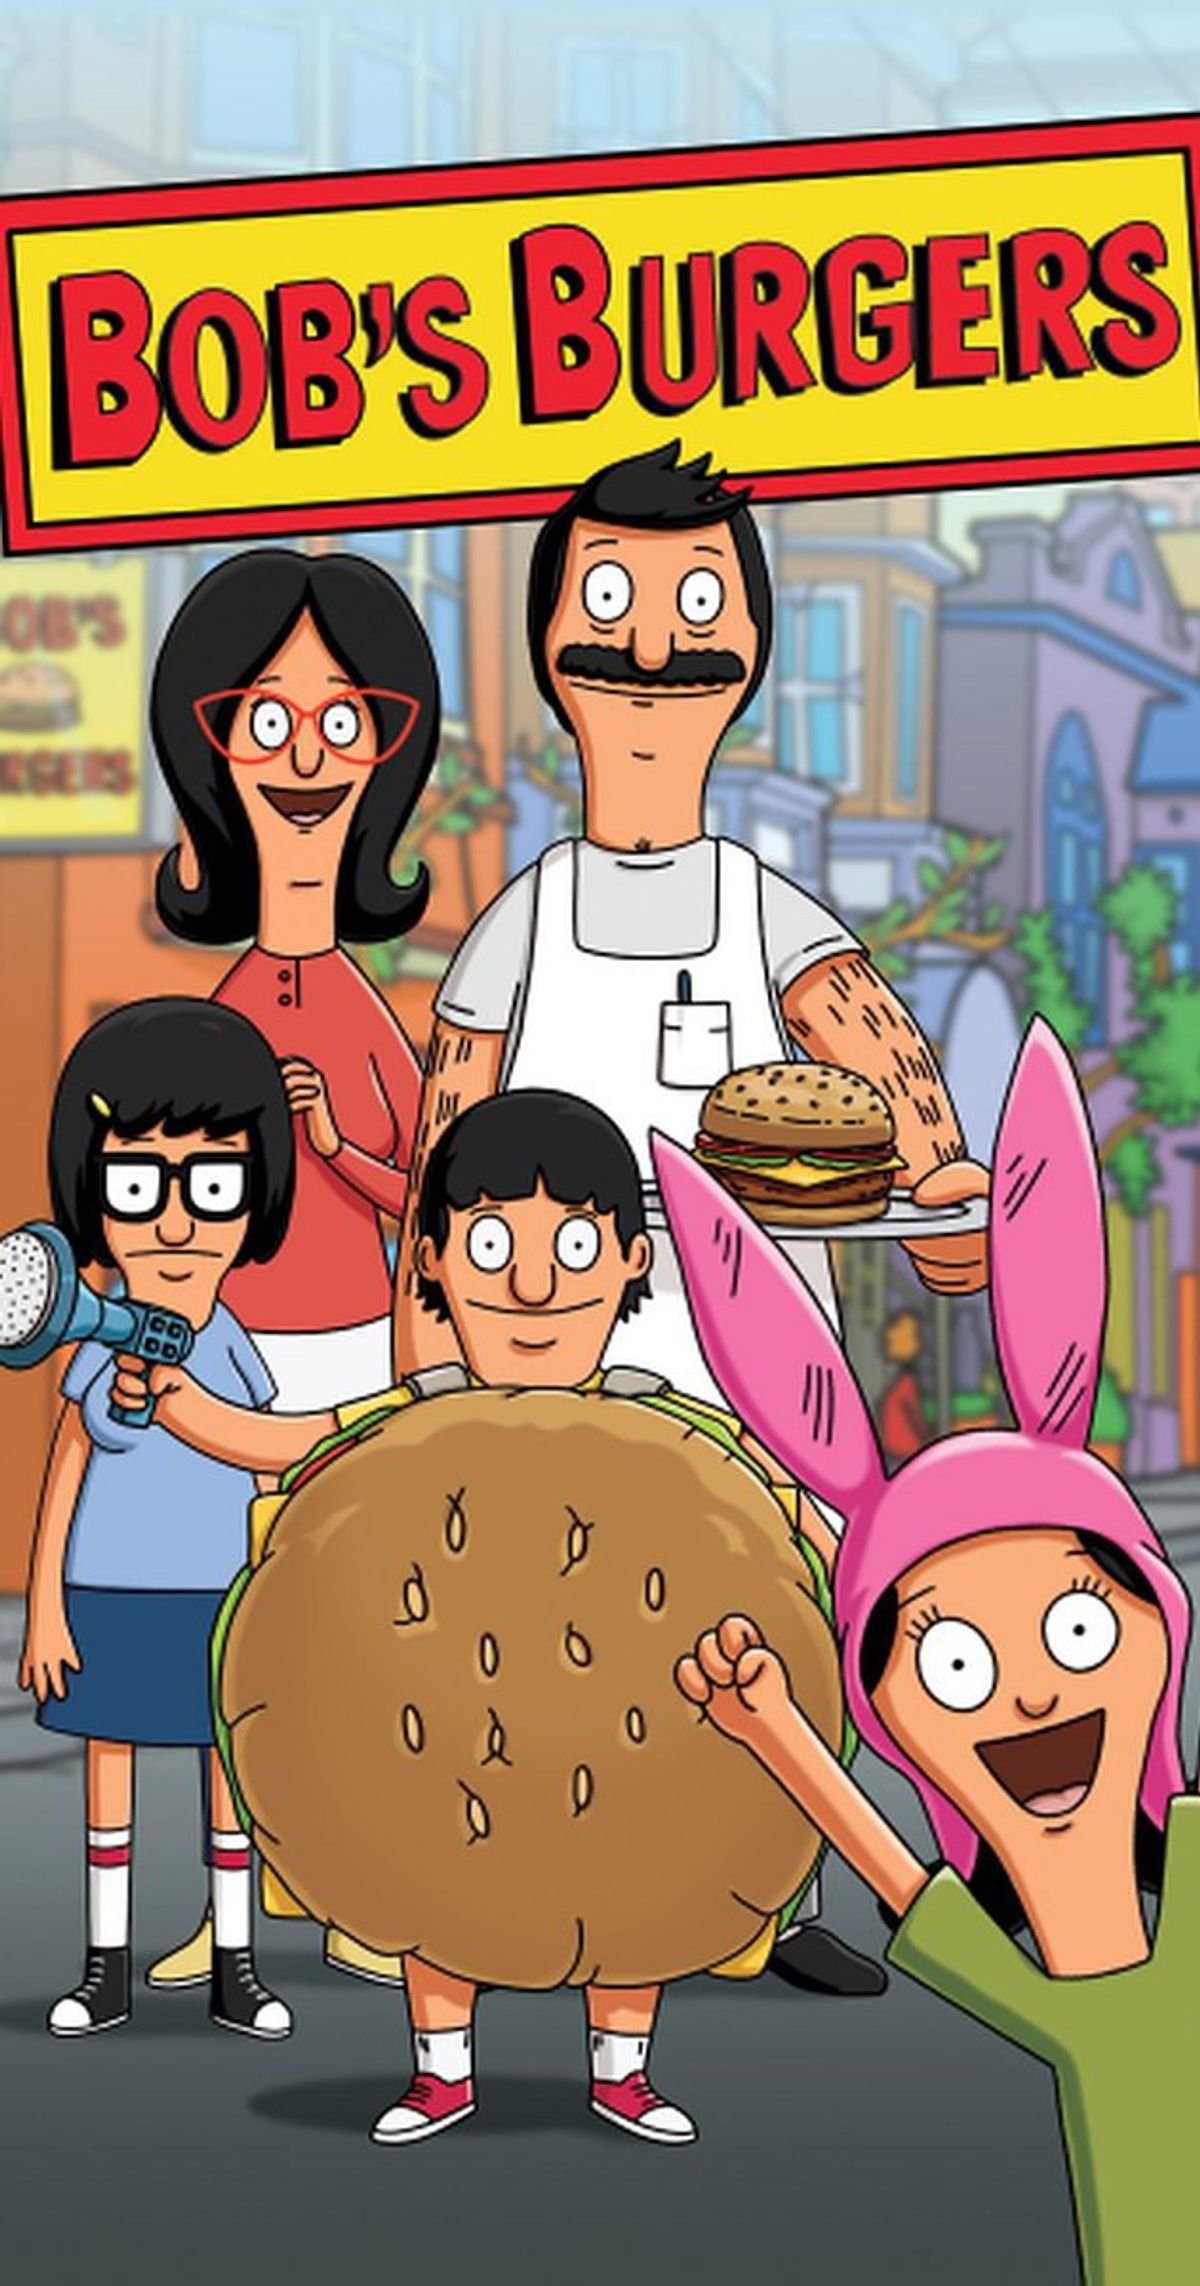 Thanksgiving Break As Told By Bob's Burgers